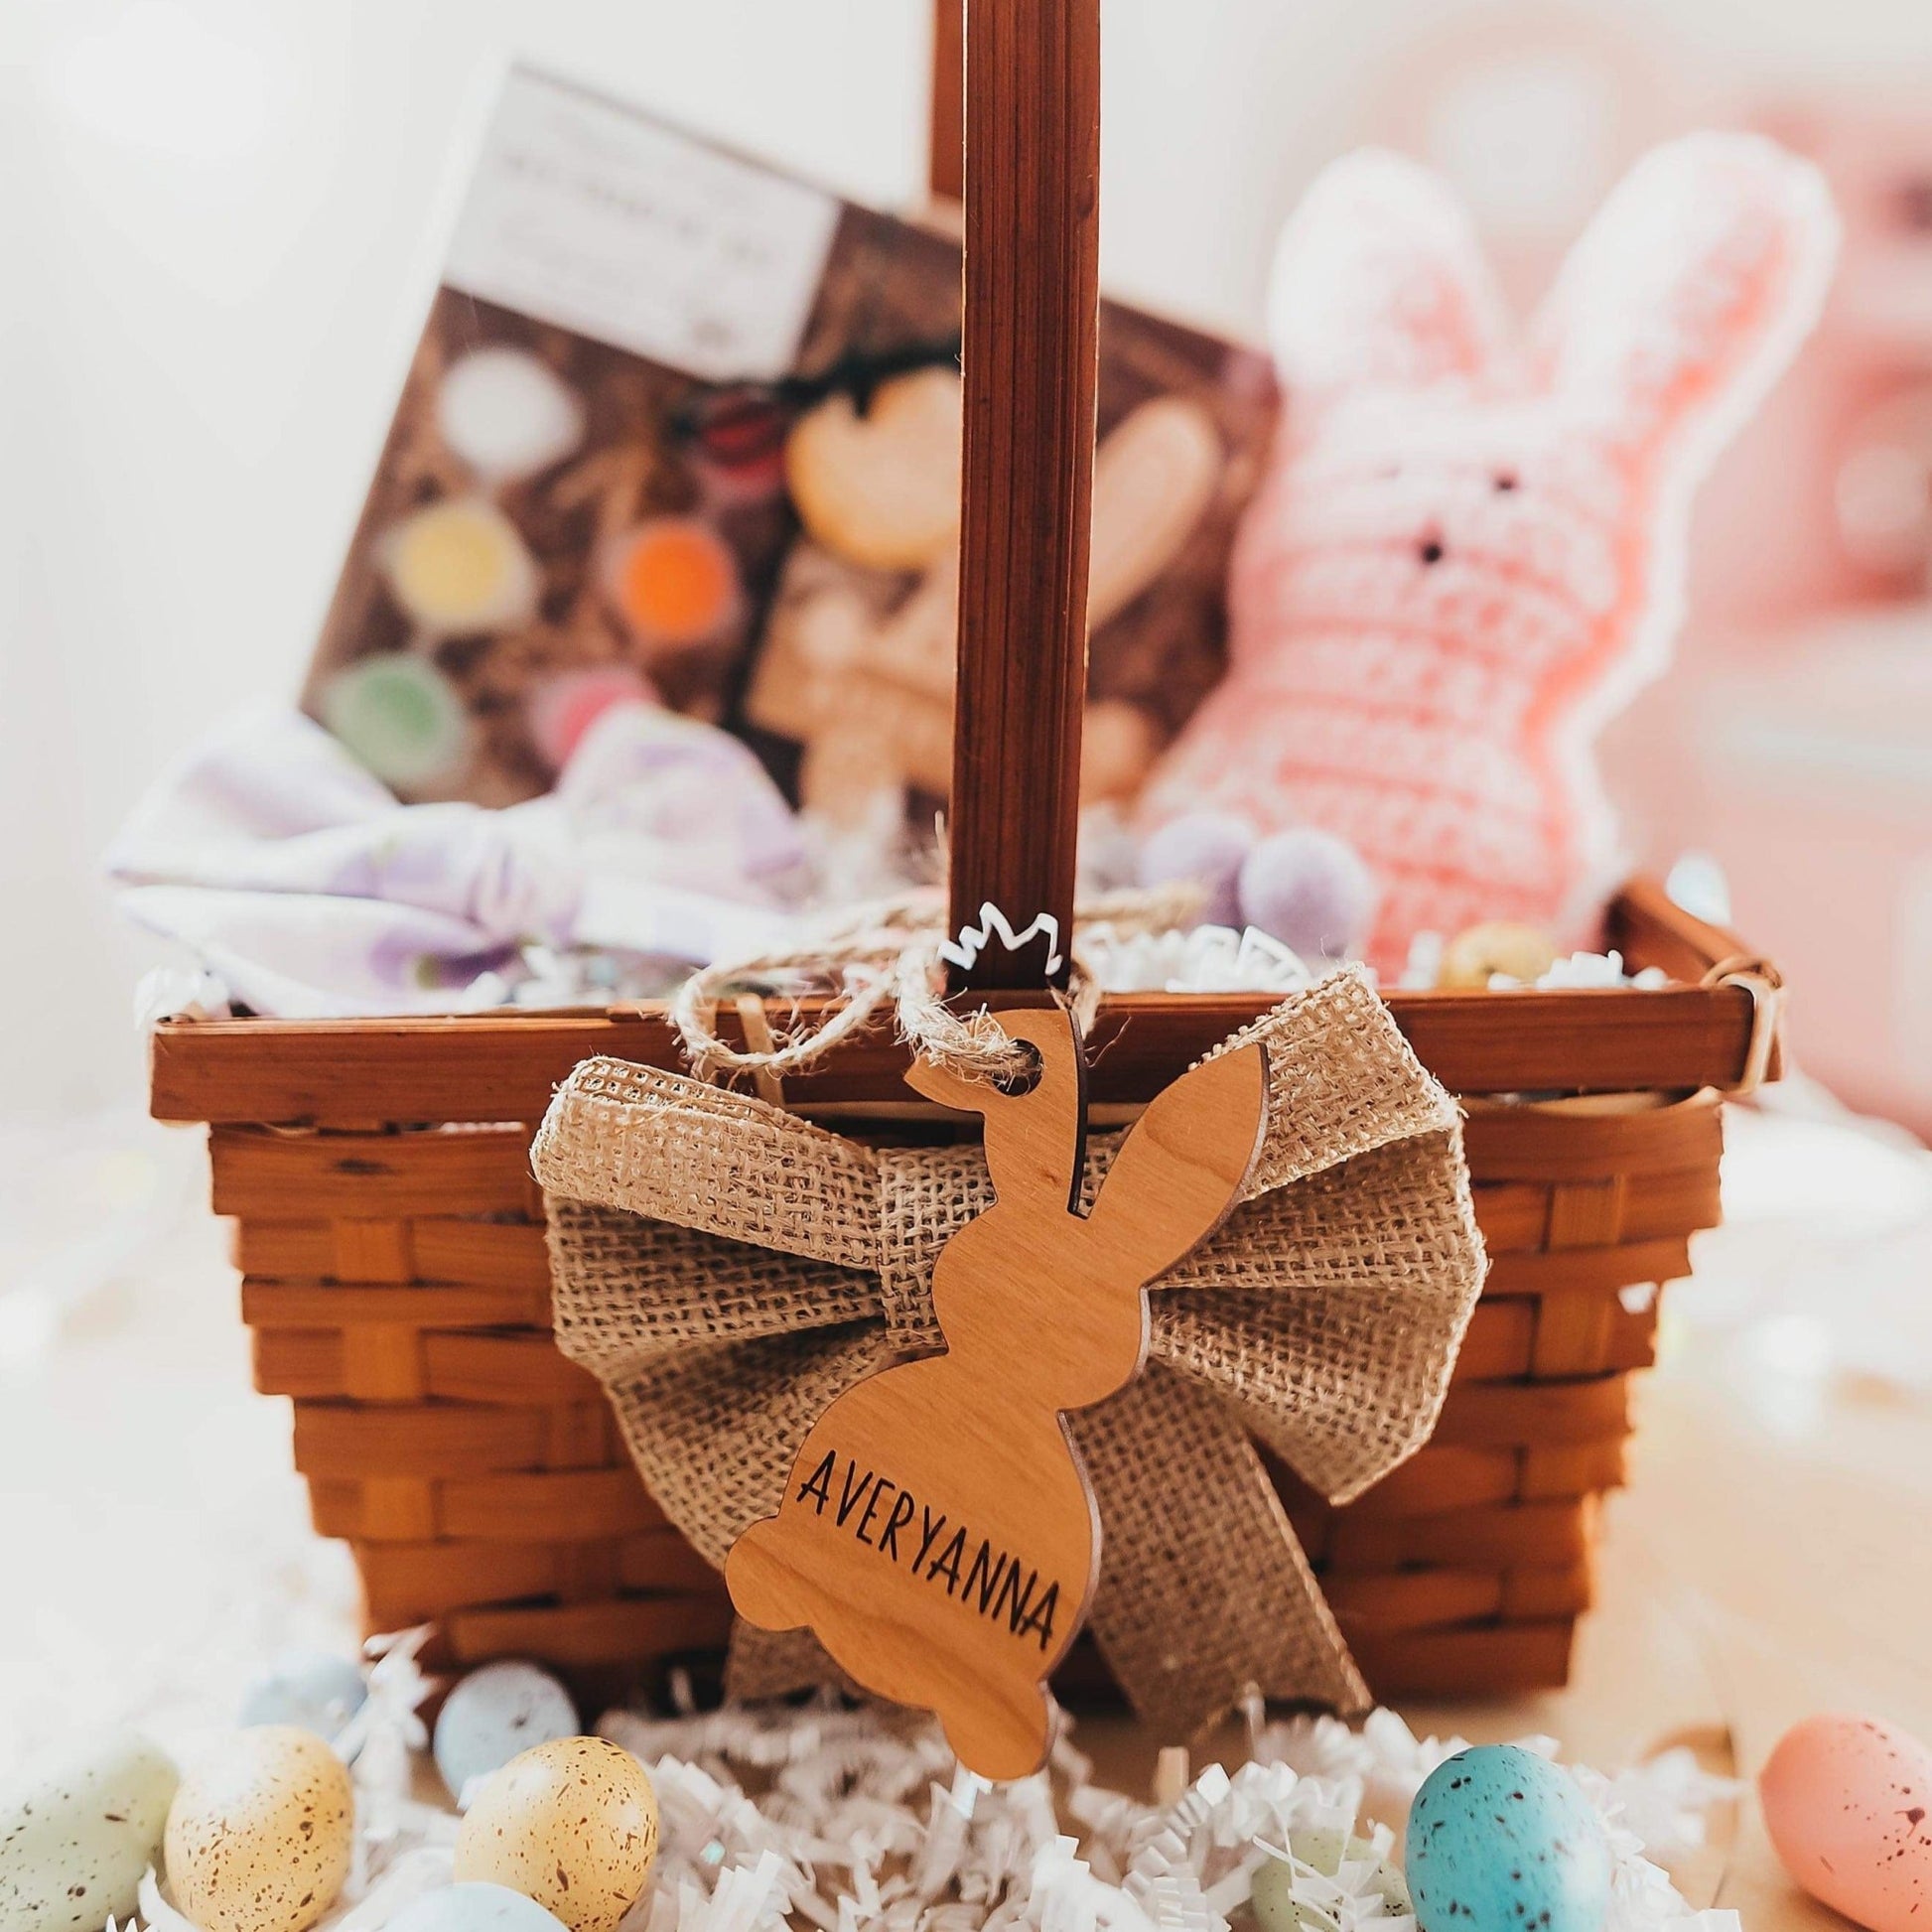 Easter Bunny Basket Tags - Laser Cut and Laser Engraved Cherry wood by LeeMo Designs in Bend, Oregon